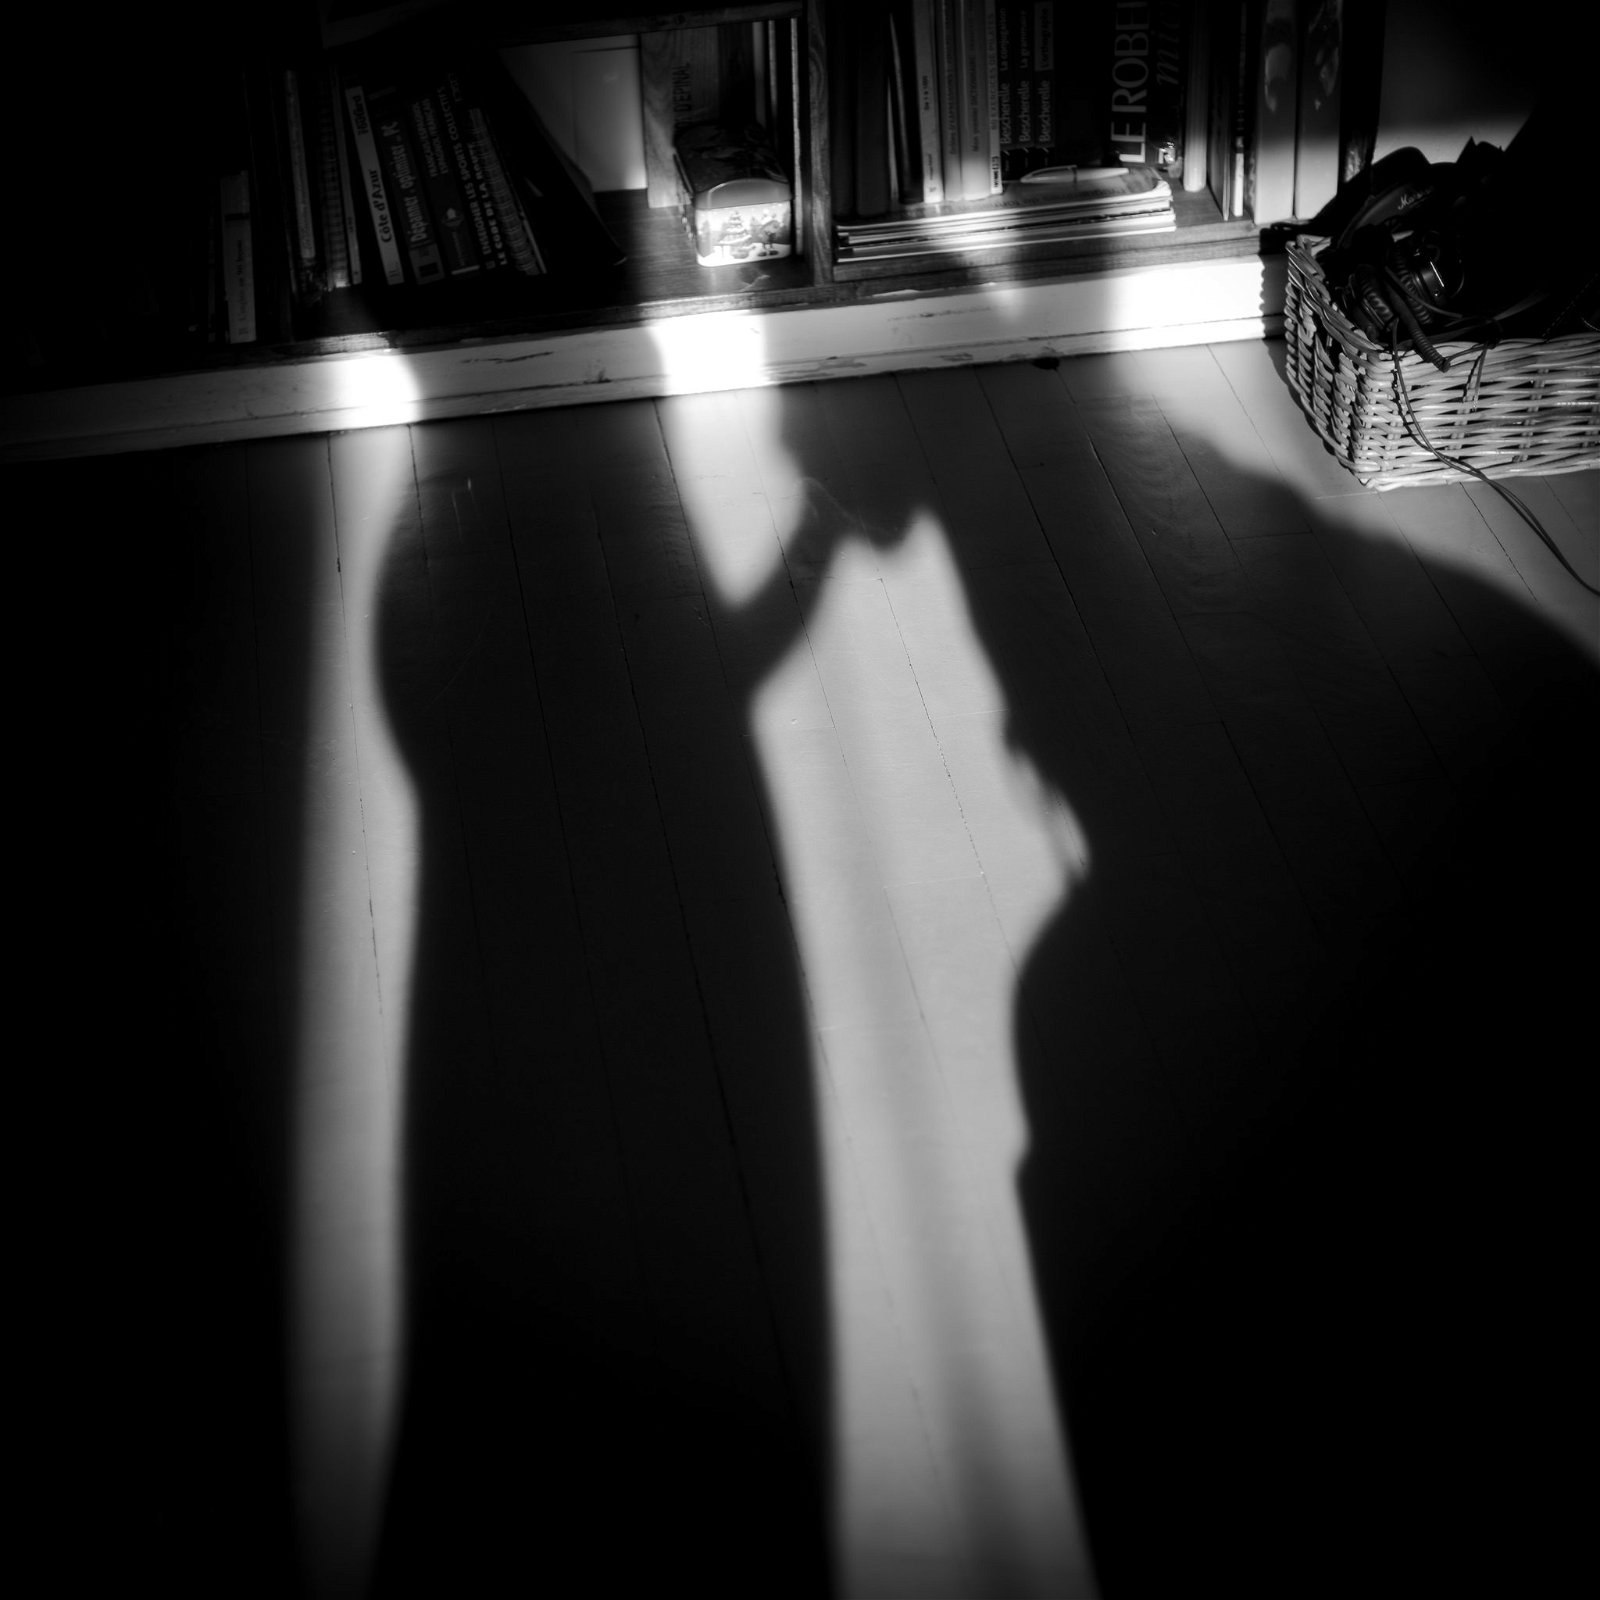 Photo by Satiro Danzante with the username @SatiroDanzante, who is a verified user,  December 21, 2019 at 10:38 AM and the text says 'Our shadows'